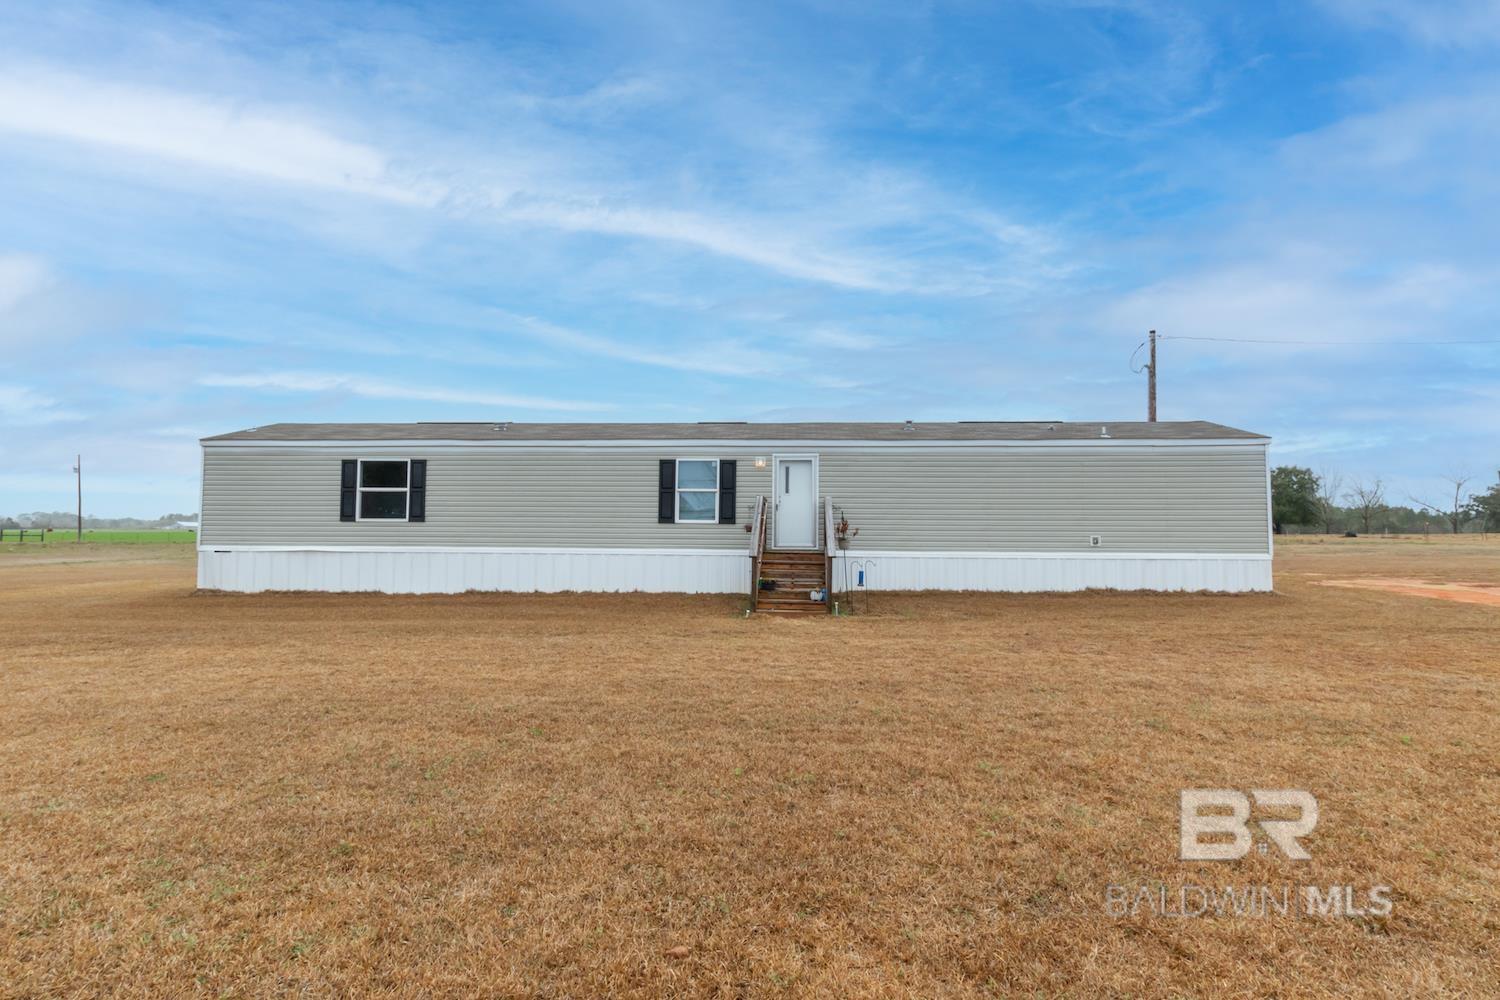 Country living at its finest! Don't miss the opportunity to own your piece of beautiful Baldwin County with this three bedroom, two bath, 1,219 sf Clayton Victory mobile home manufactured in 2019. Home is situated on 2.13 acres with incredible views in every direction! Enjoy the convenience of living just south of Highway 90, connecting Pensacola, FL to the Eastern Shore of Alabama and a short drive to the sandy, white beaches of southern Baldwin County!